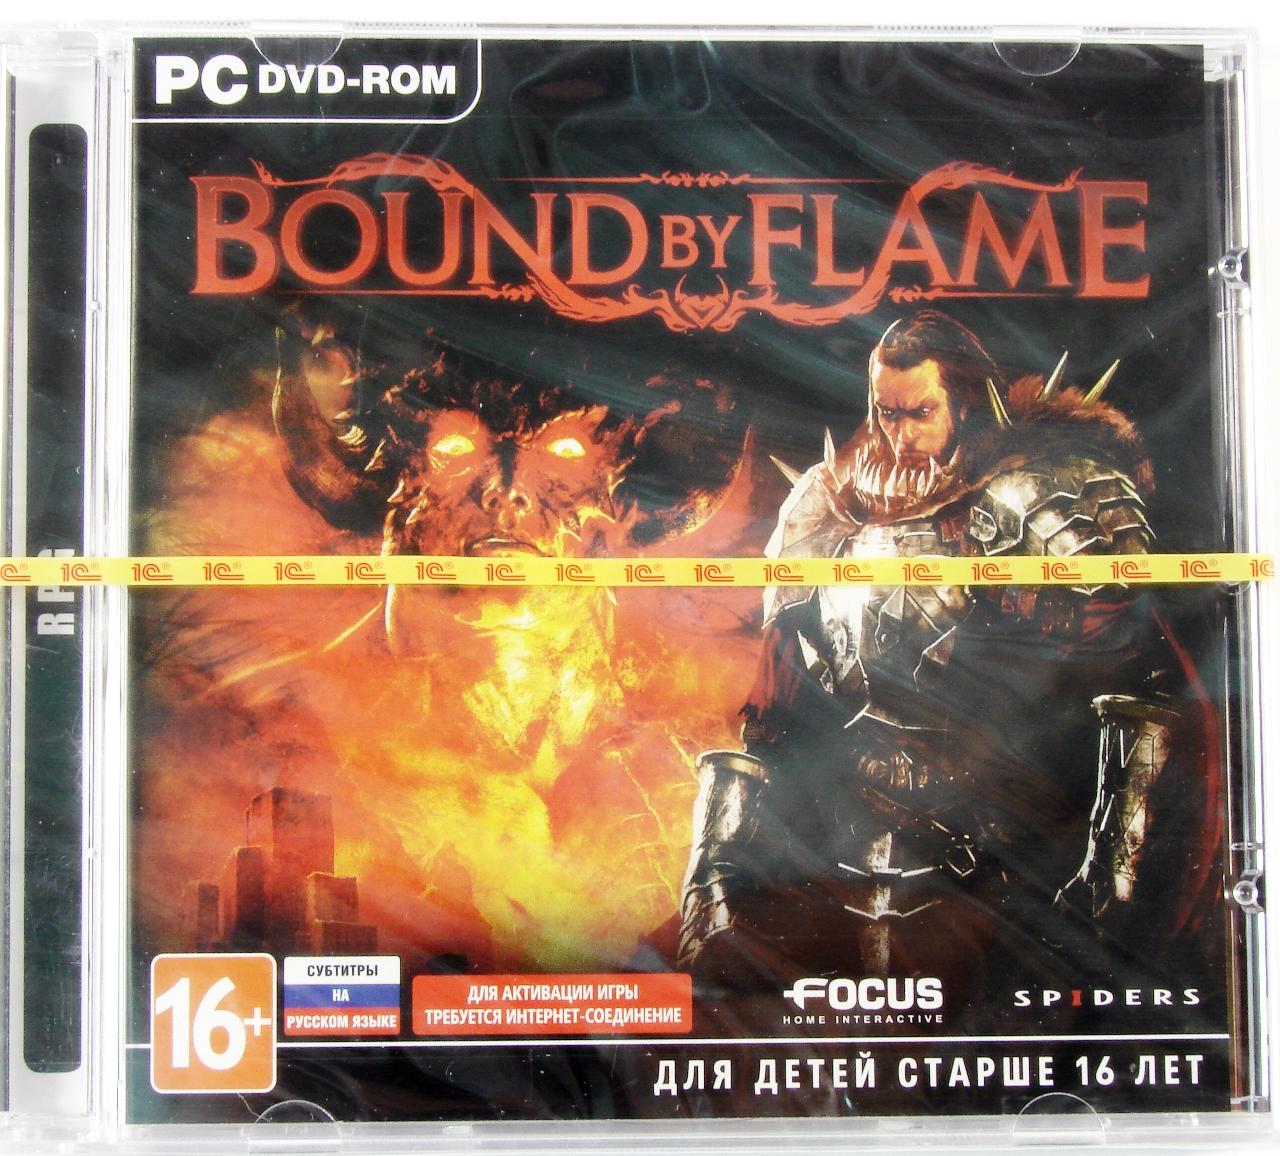  - Bound by Flame (PC),  "1C", 1 DVD